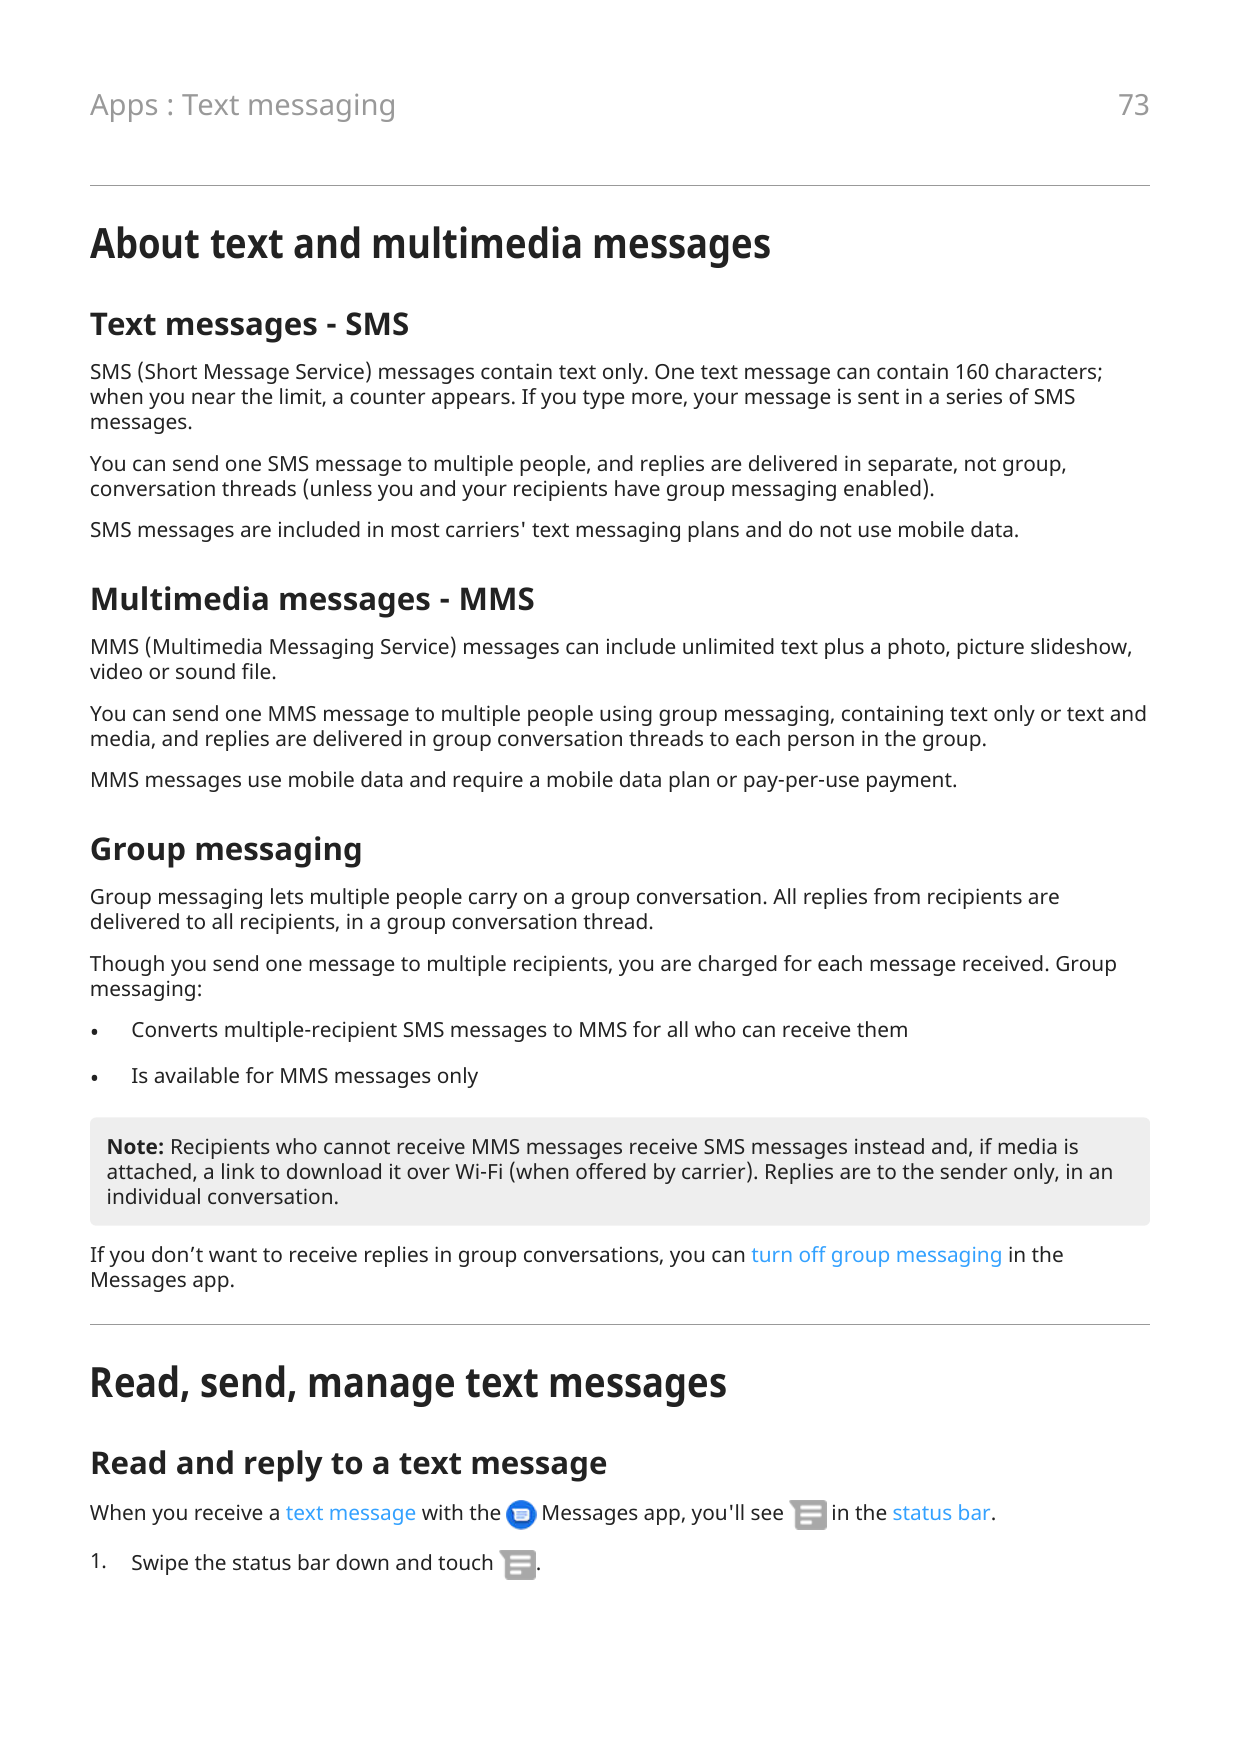 73Apps : Text messagingAbout text and multimedia messagesText messages - SMSSMS (Short Message Service) messages contain text on